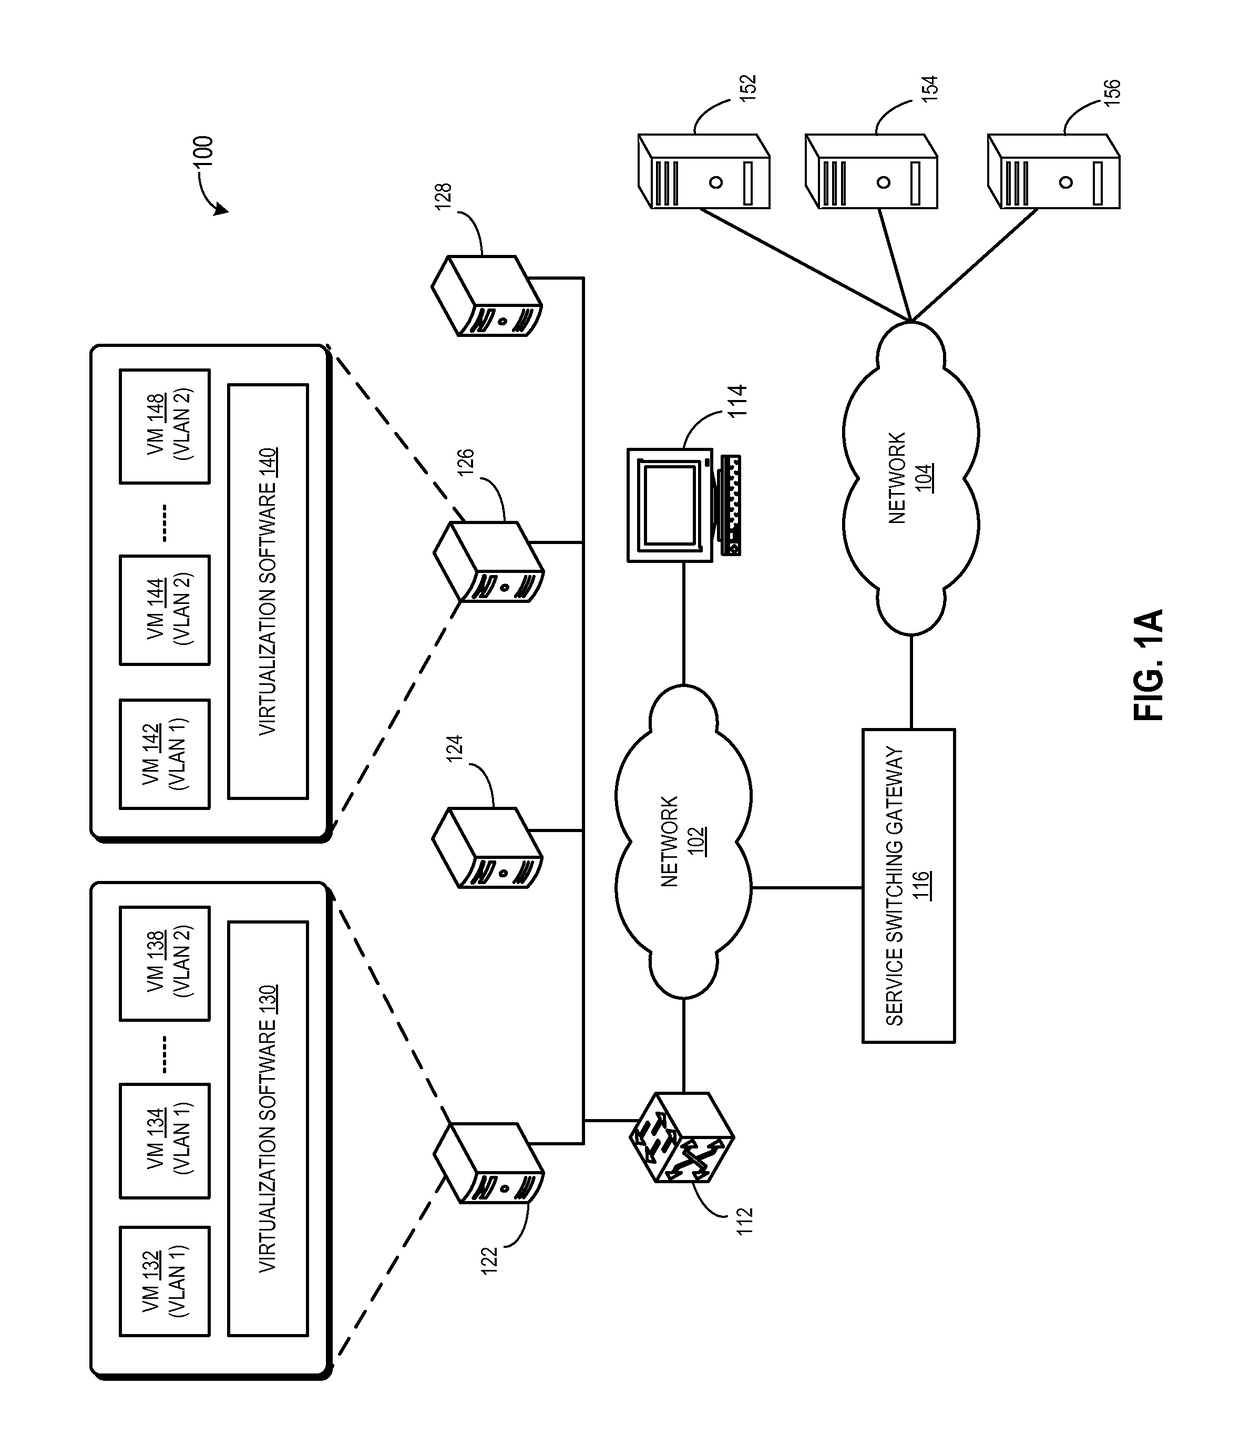 Method and system for service switching using service tags